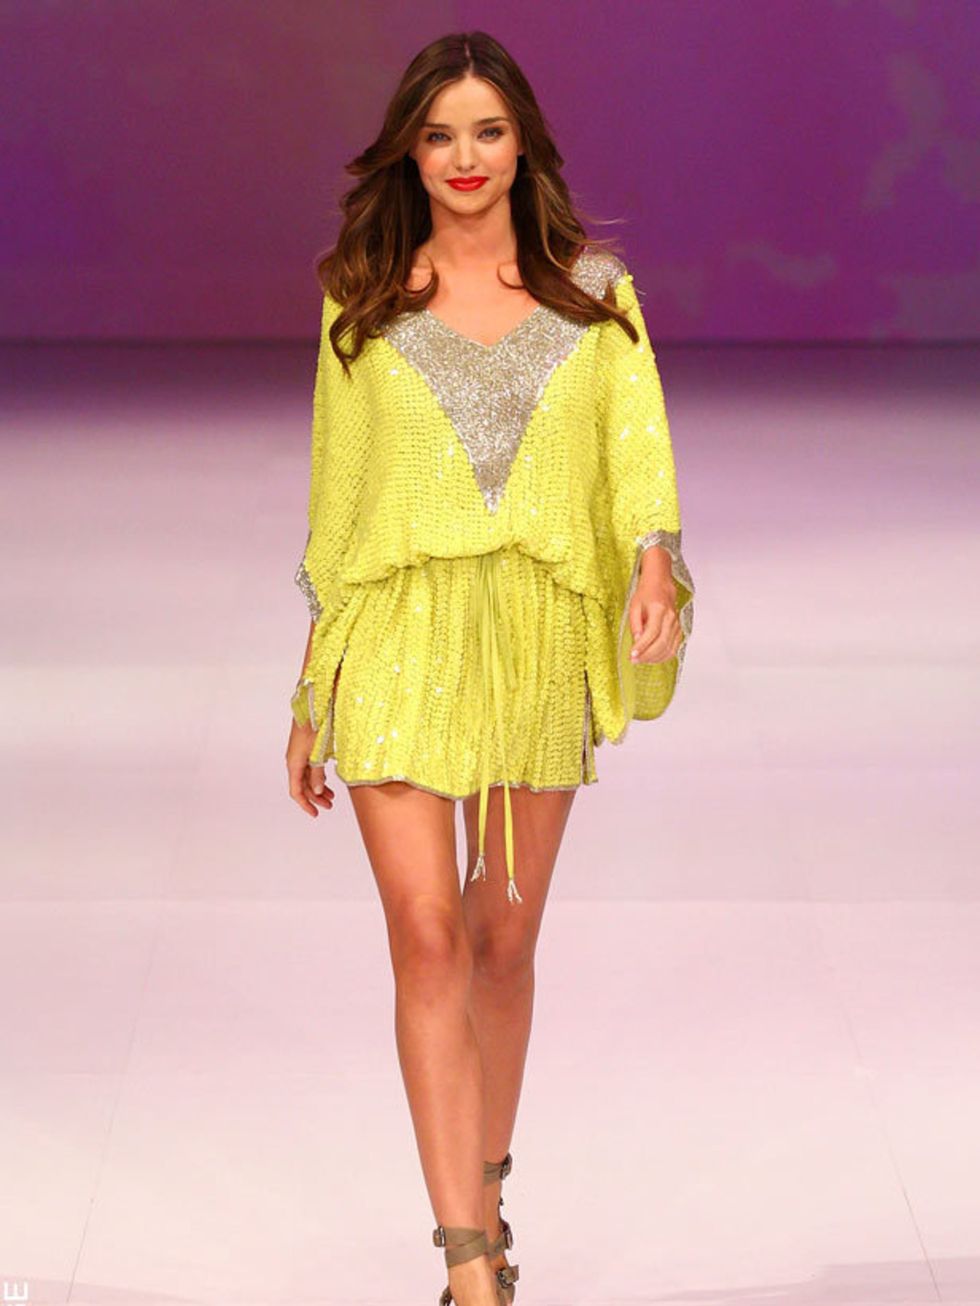 <p><a href="http://www.elleuk.com/starstyle/style-files/(section)/miranda-kerr">Miranda Kerr</a> opened the David Jones spring/summer fashion show wearing a chartreuse sequinned kaftan by Camilla.</p>